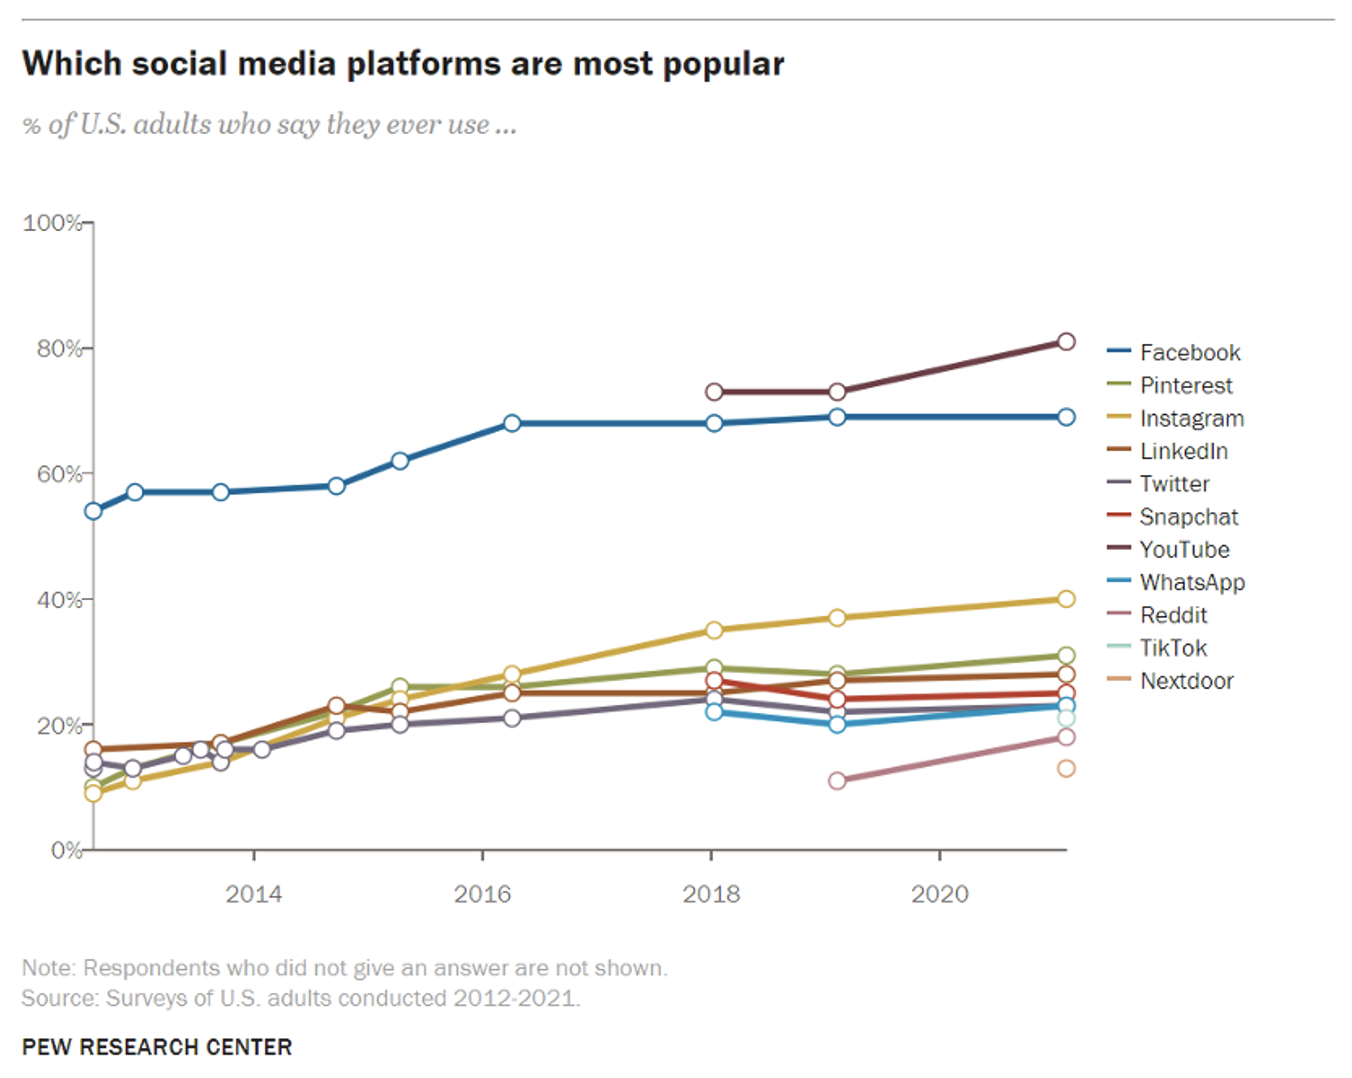 A line chart illustrating the popularity of social media platforms. The Y-axis represents the percentage of U.S. adults who report using a particular platform, while the X-axis represents the years from 2014 to 2020. Among the social media platforms, YouTube emerges as the most popular, closely followed by Facebook.